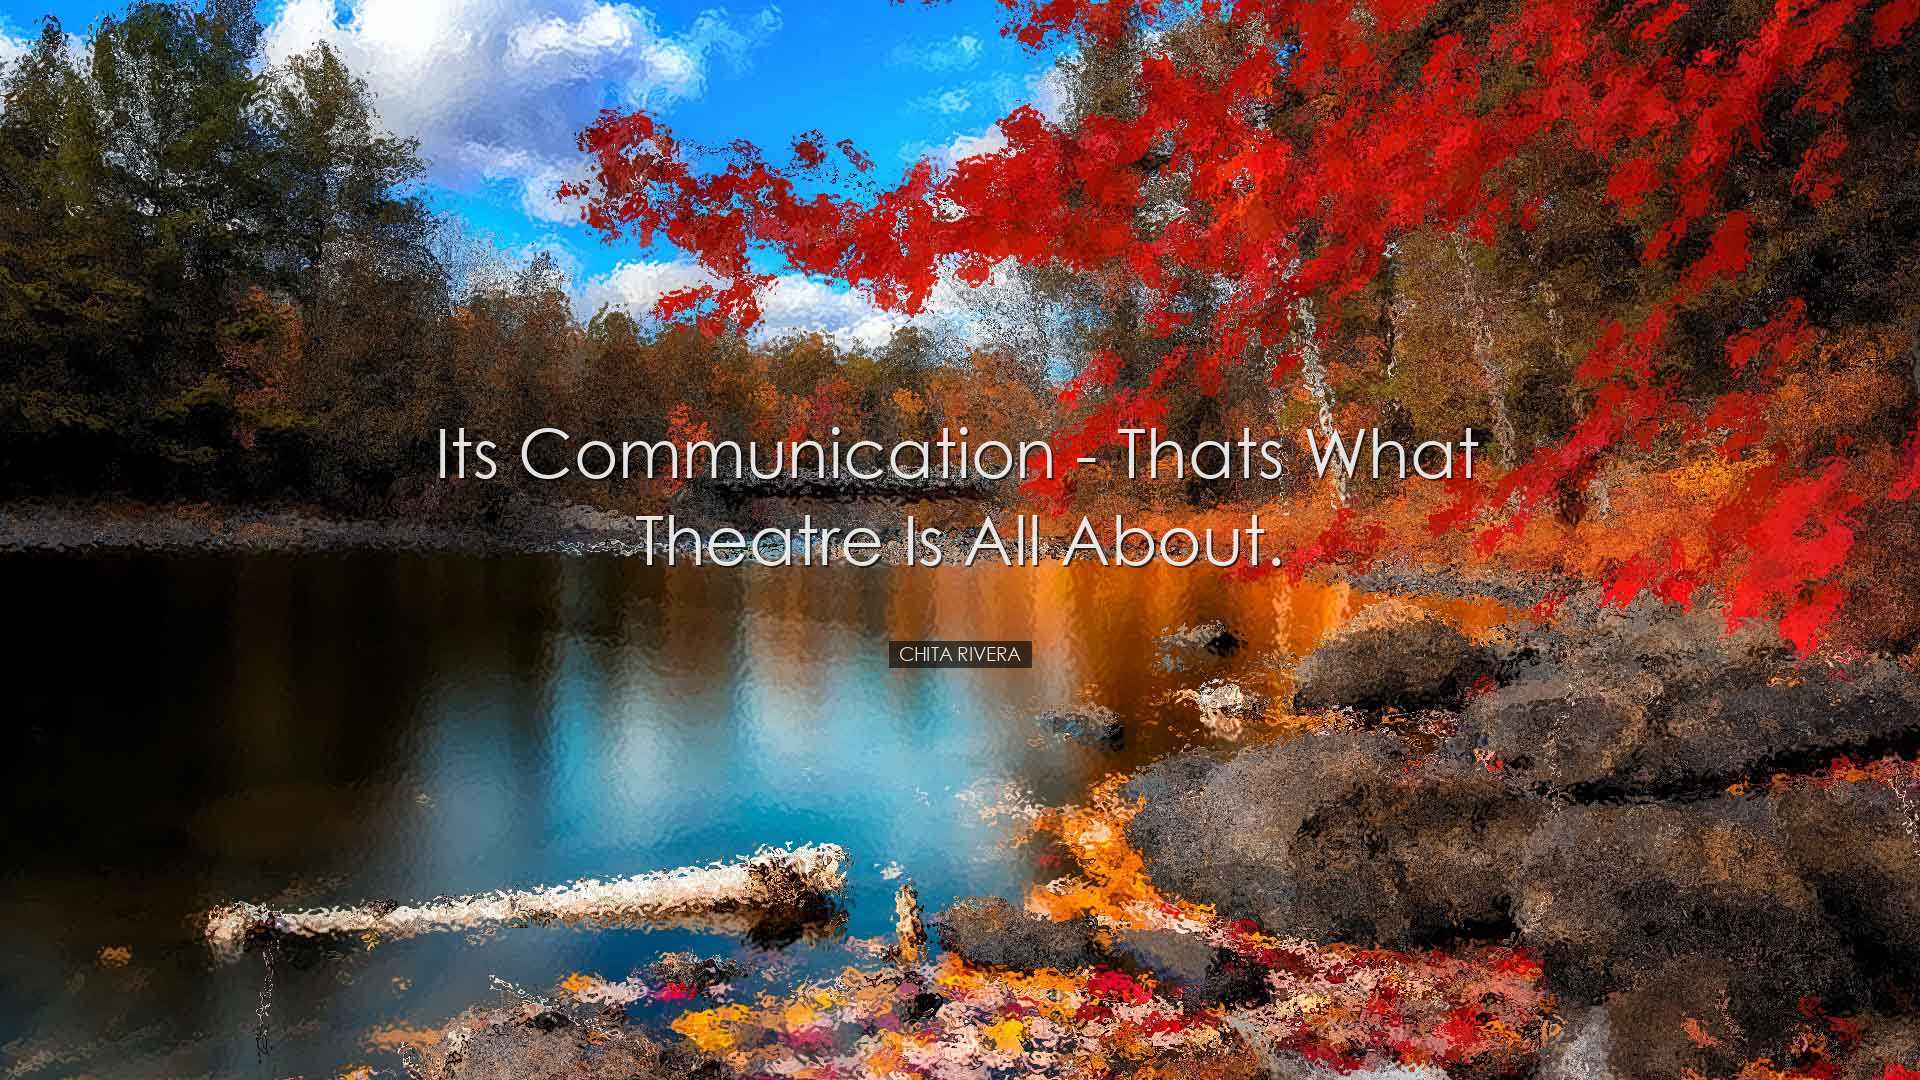 Its communication - thats what theatre is all about. - Chita River